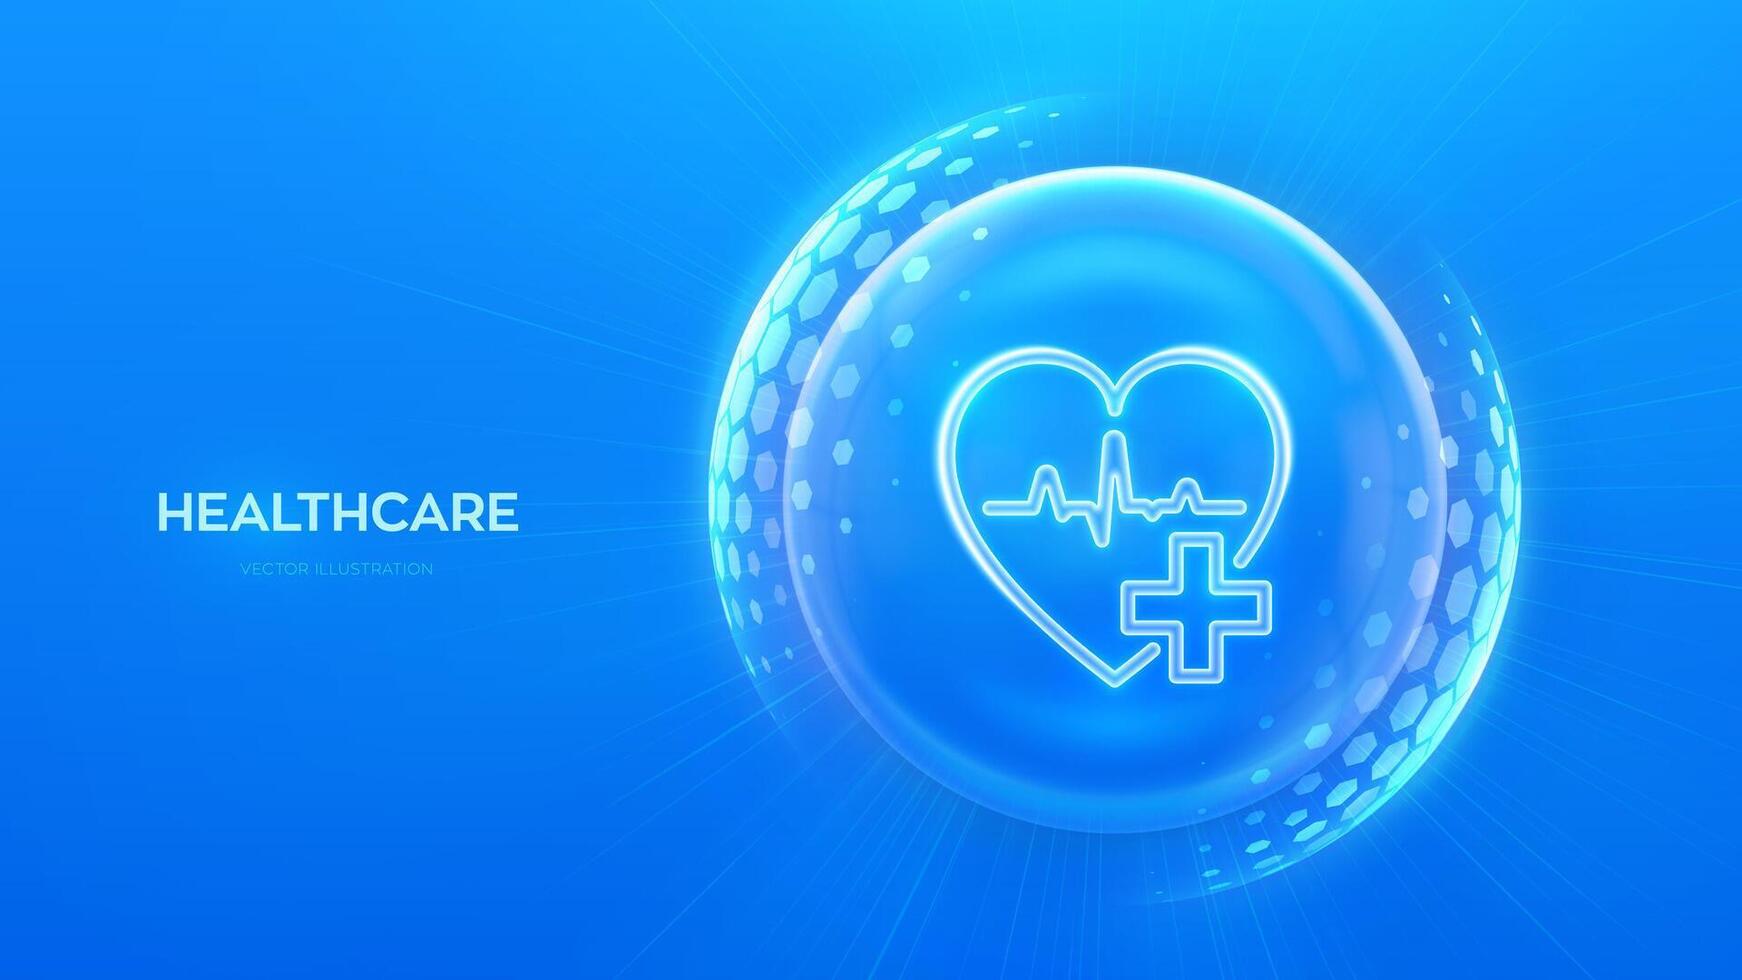 Healthcare. Health insurance. Heart with cross icon inside transparent protection sphere shield with hexagon pattern on blue background. Health Care and Medical services concept. Vector illustration.